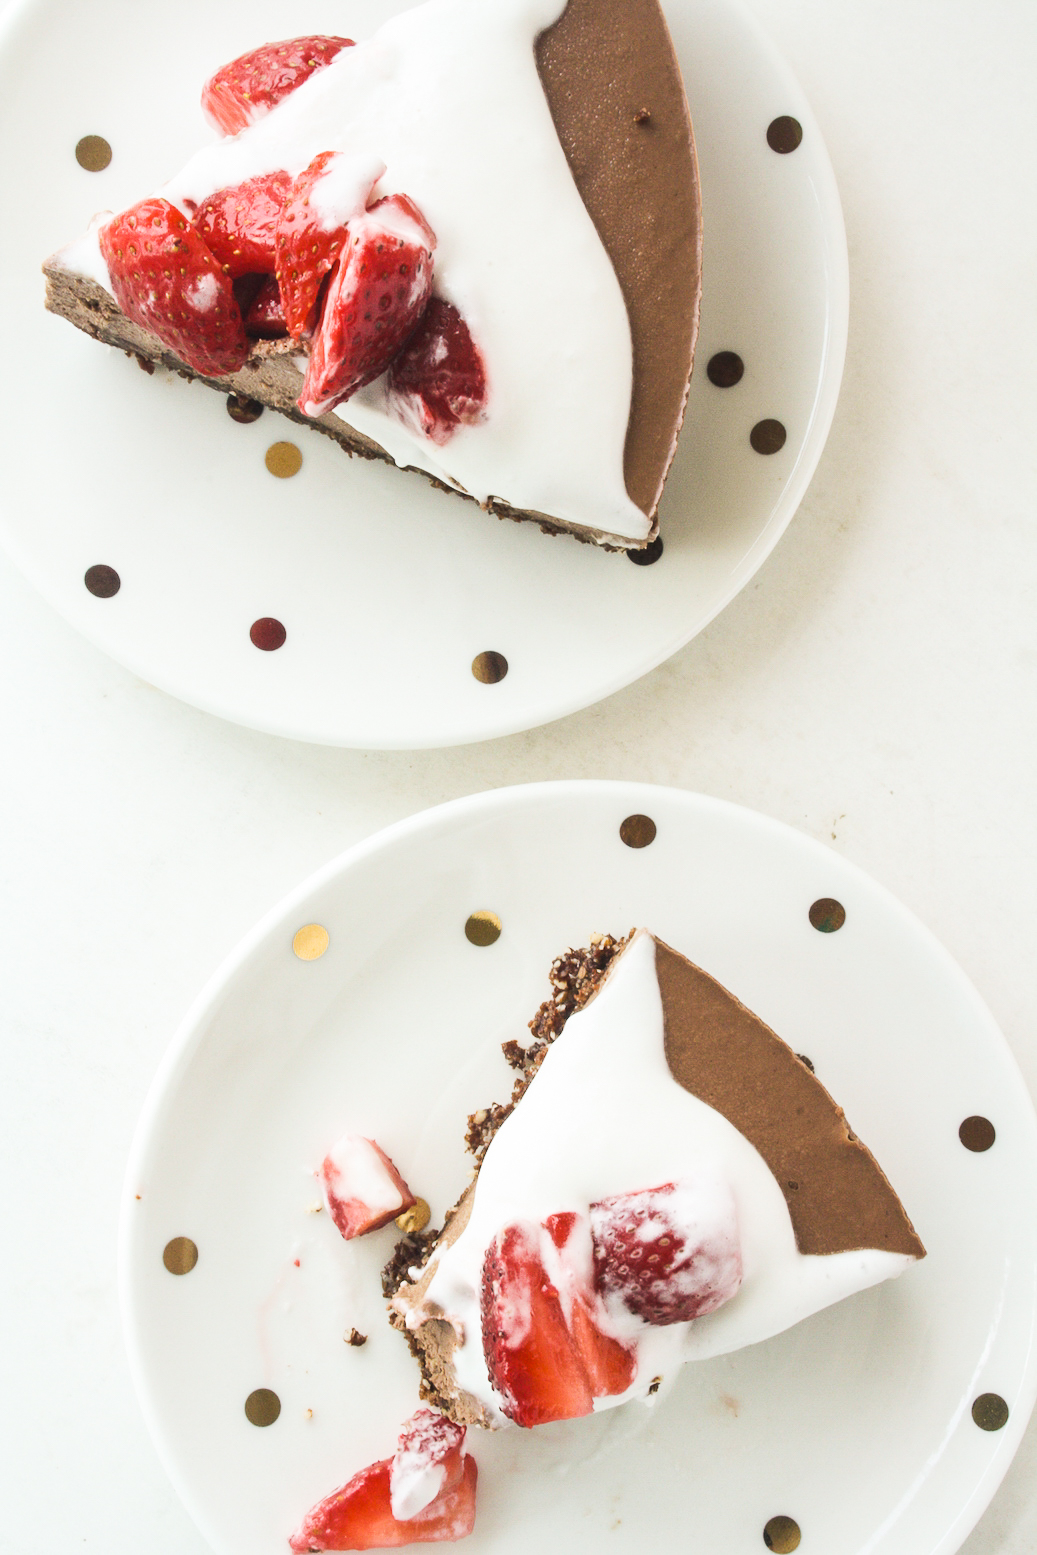 Creamy, naturally-sweetened chocolate cheesecake made with cashews, dates and almonds!